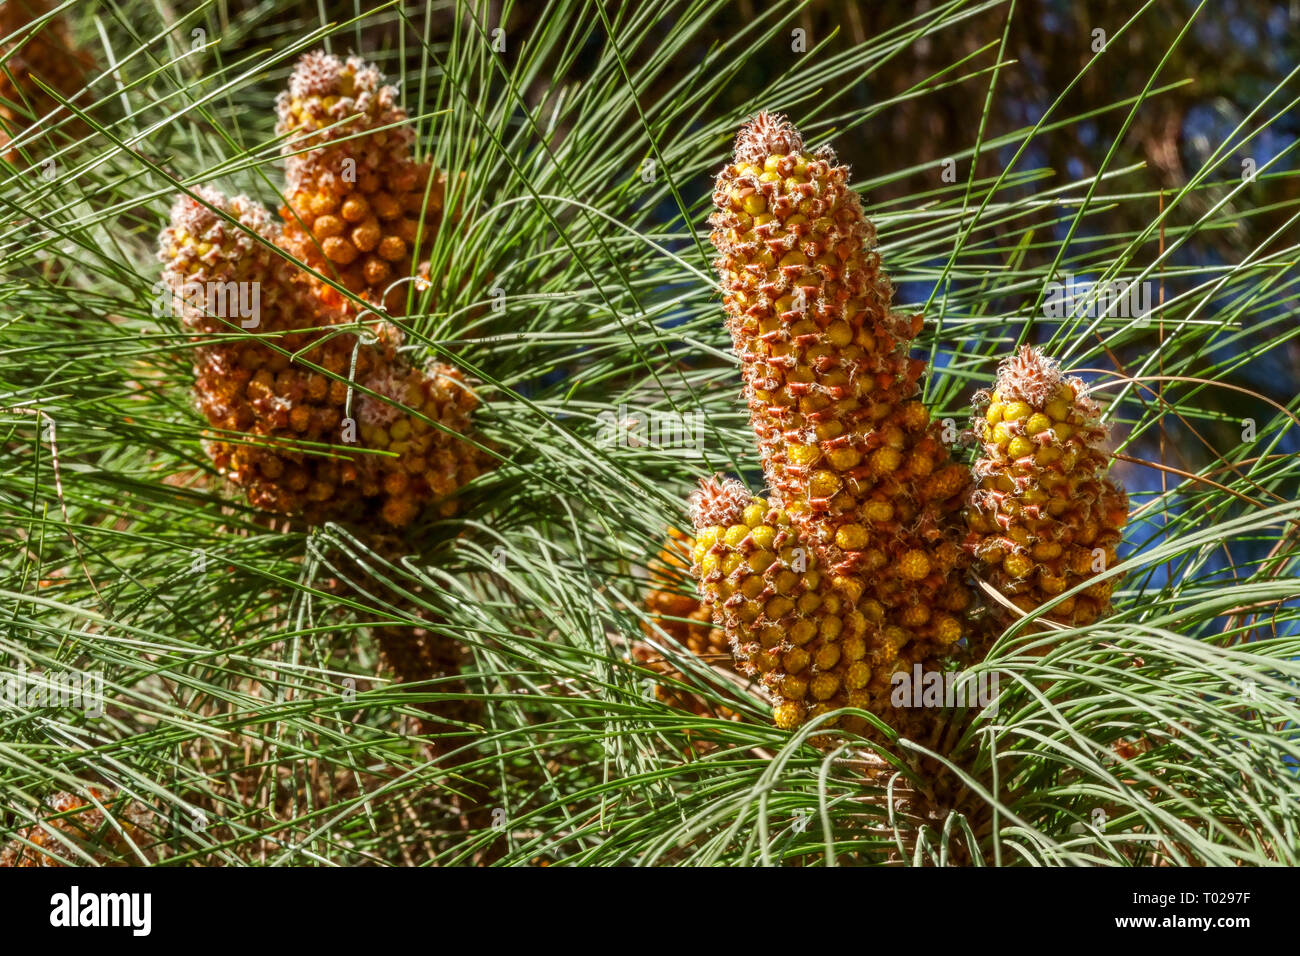 Canary Islands Pine, Pinus canariensis, spring cones Male cones,Full of pollen Stock Photo